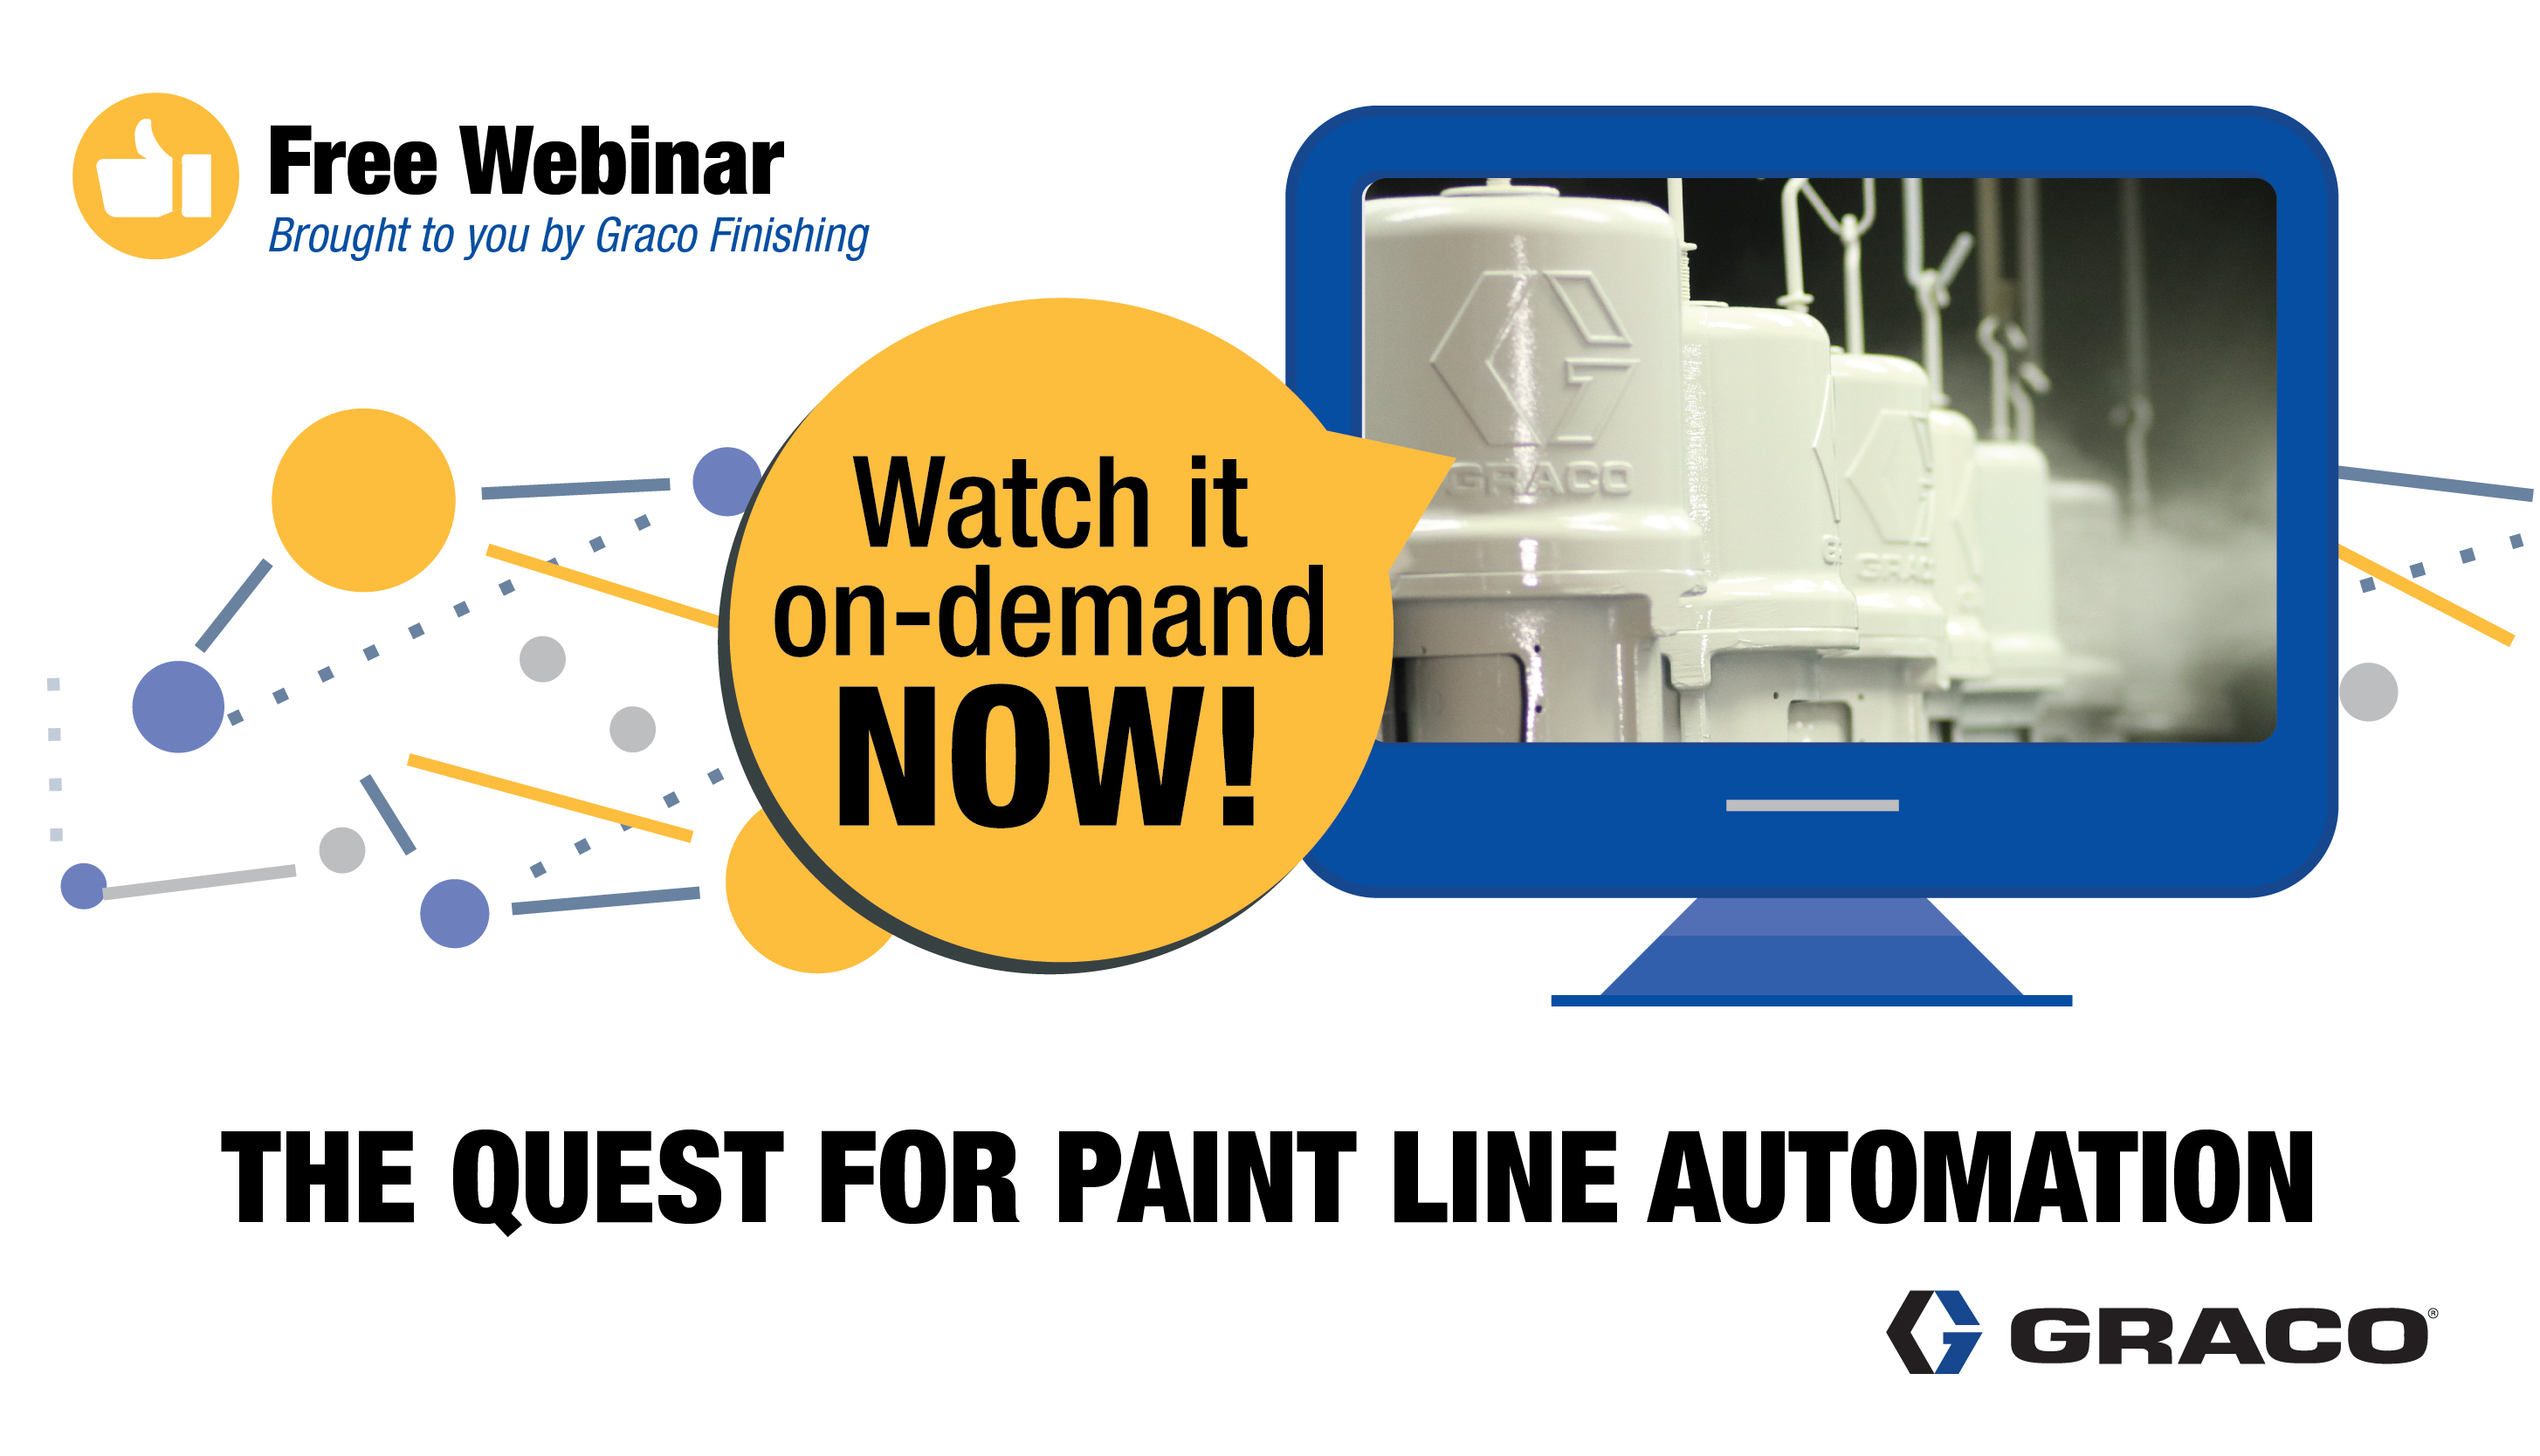 Free 45-minute webinar brought to you by Graco Finishing covers paint line automation.